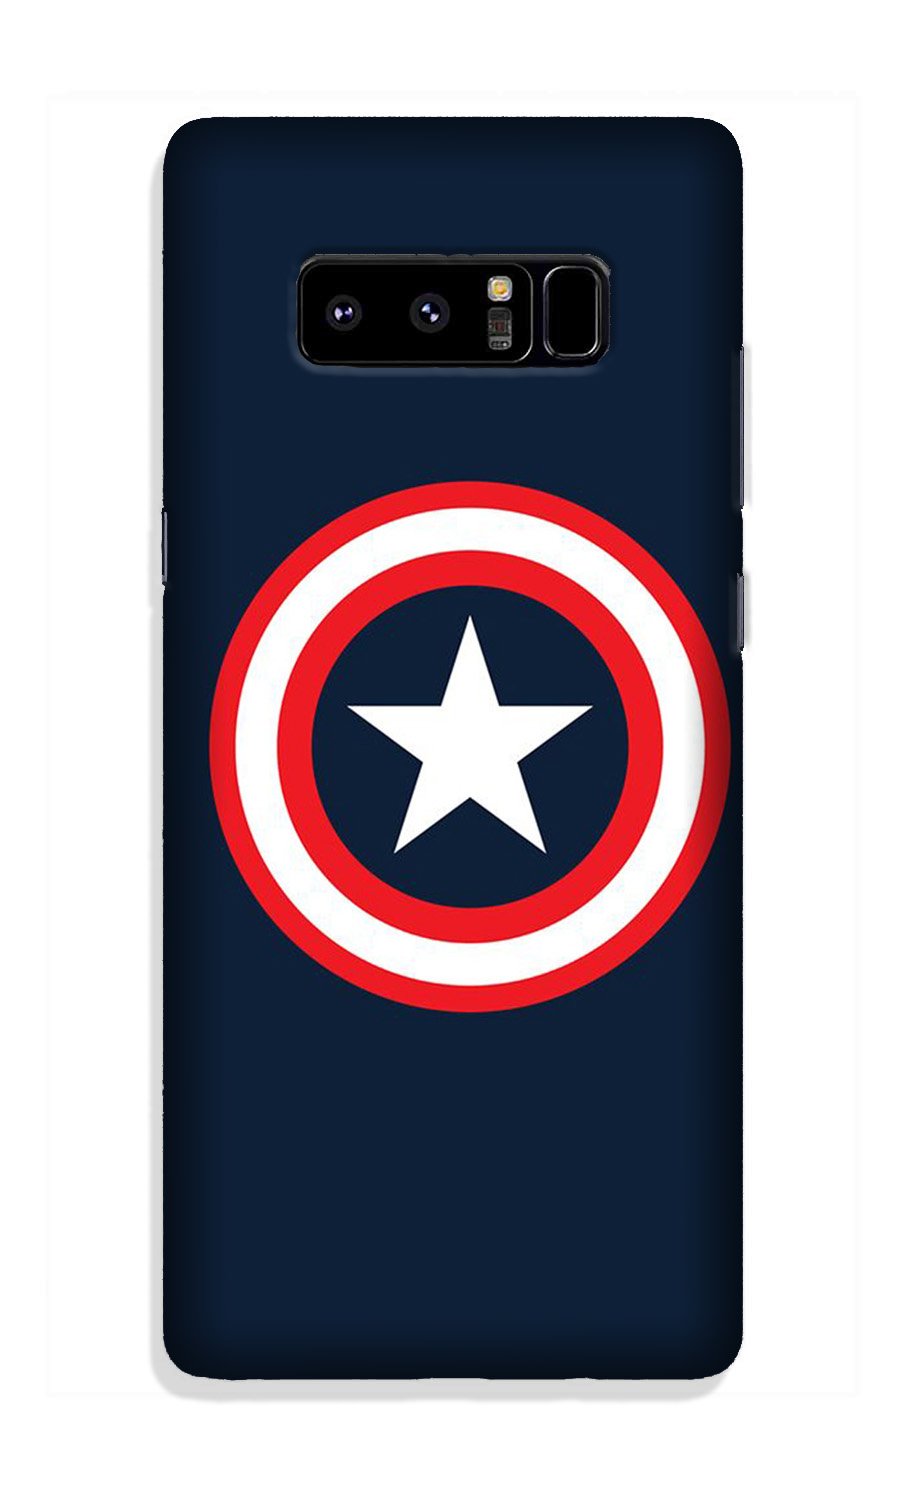 Captain America Case for Galaxy Note 8